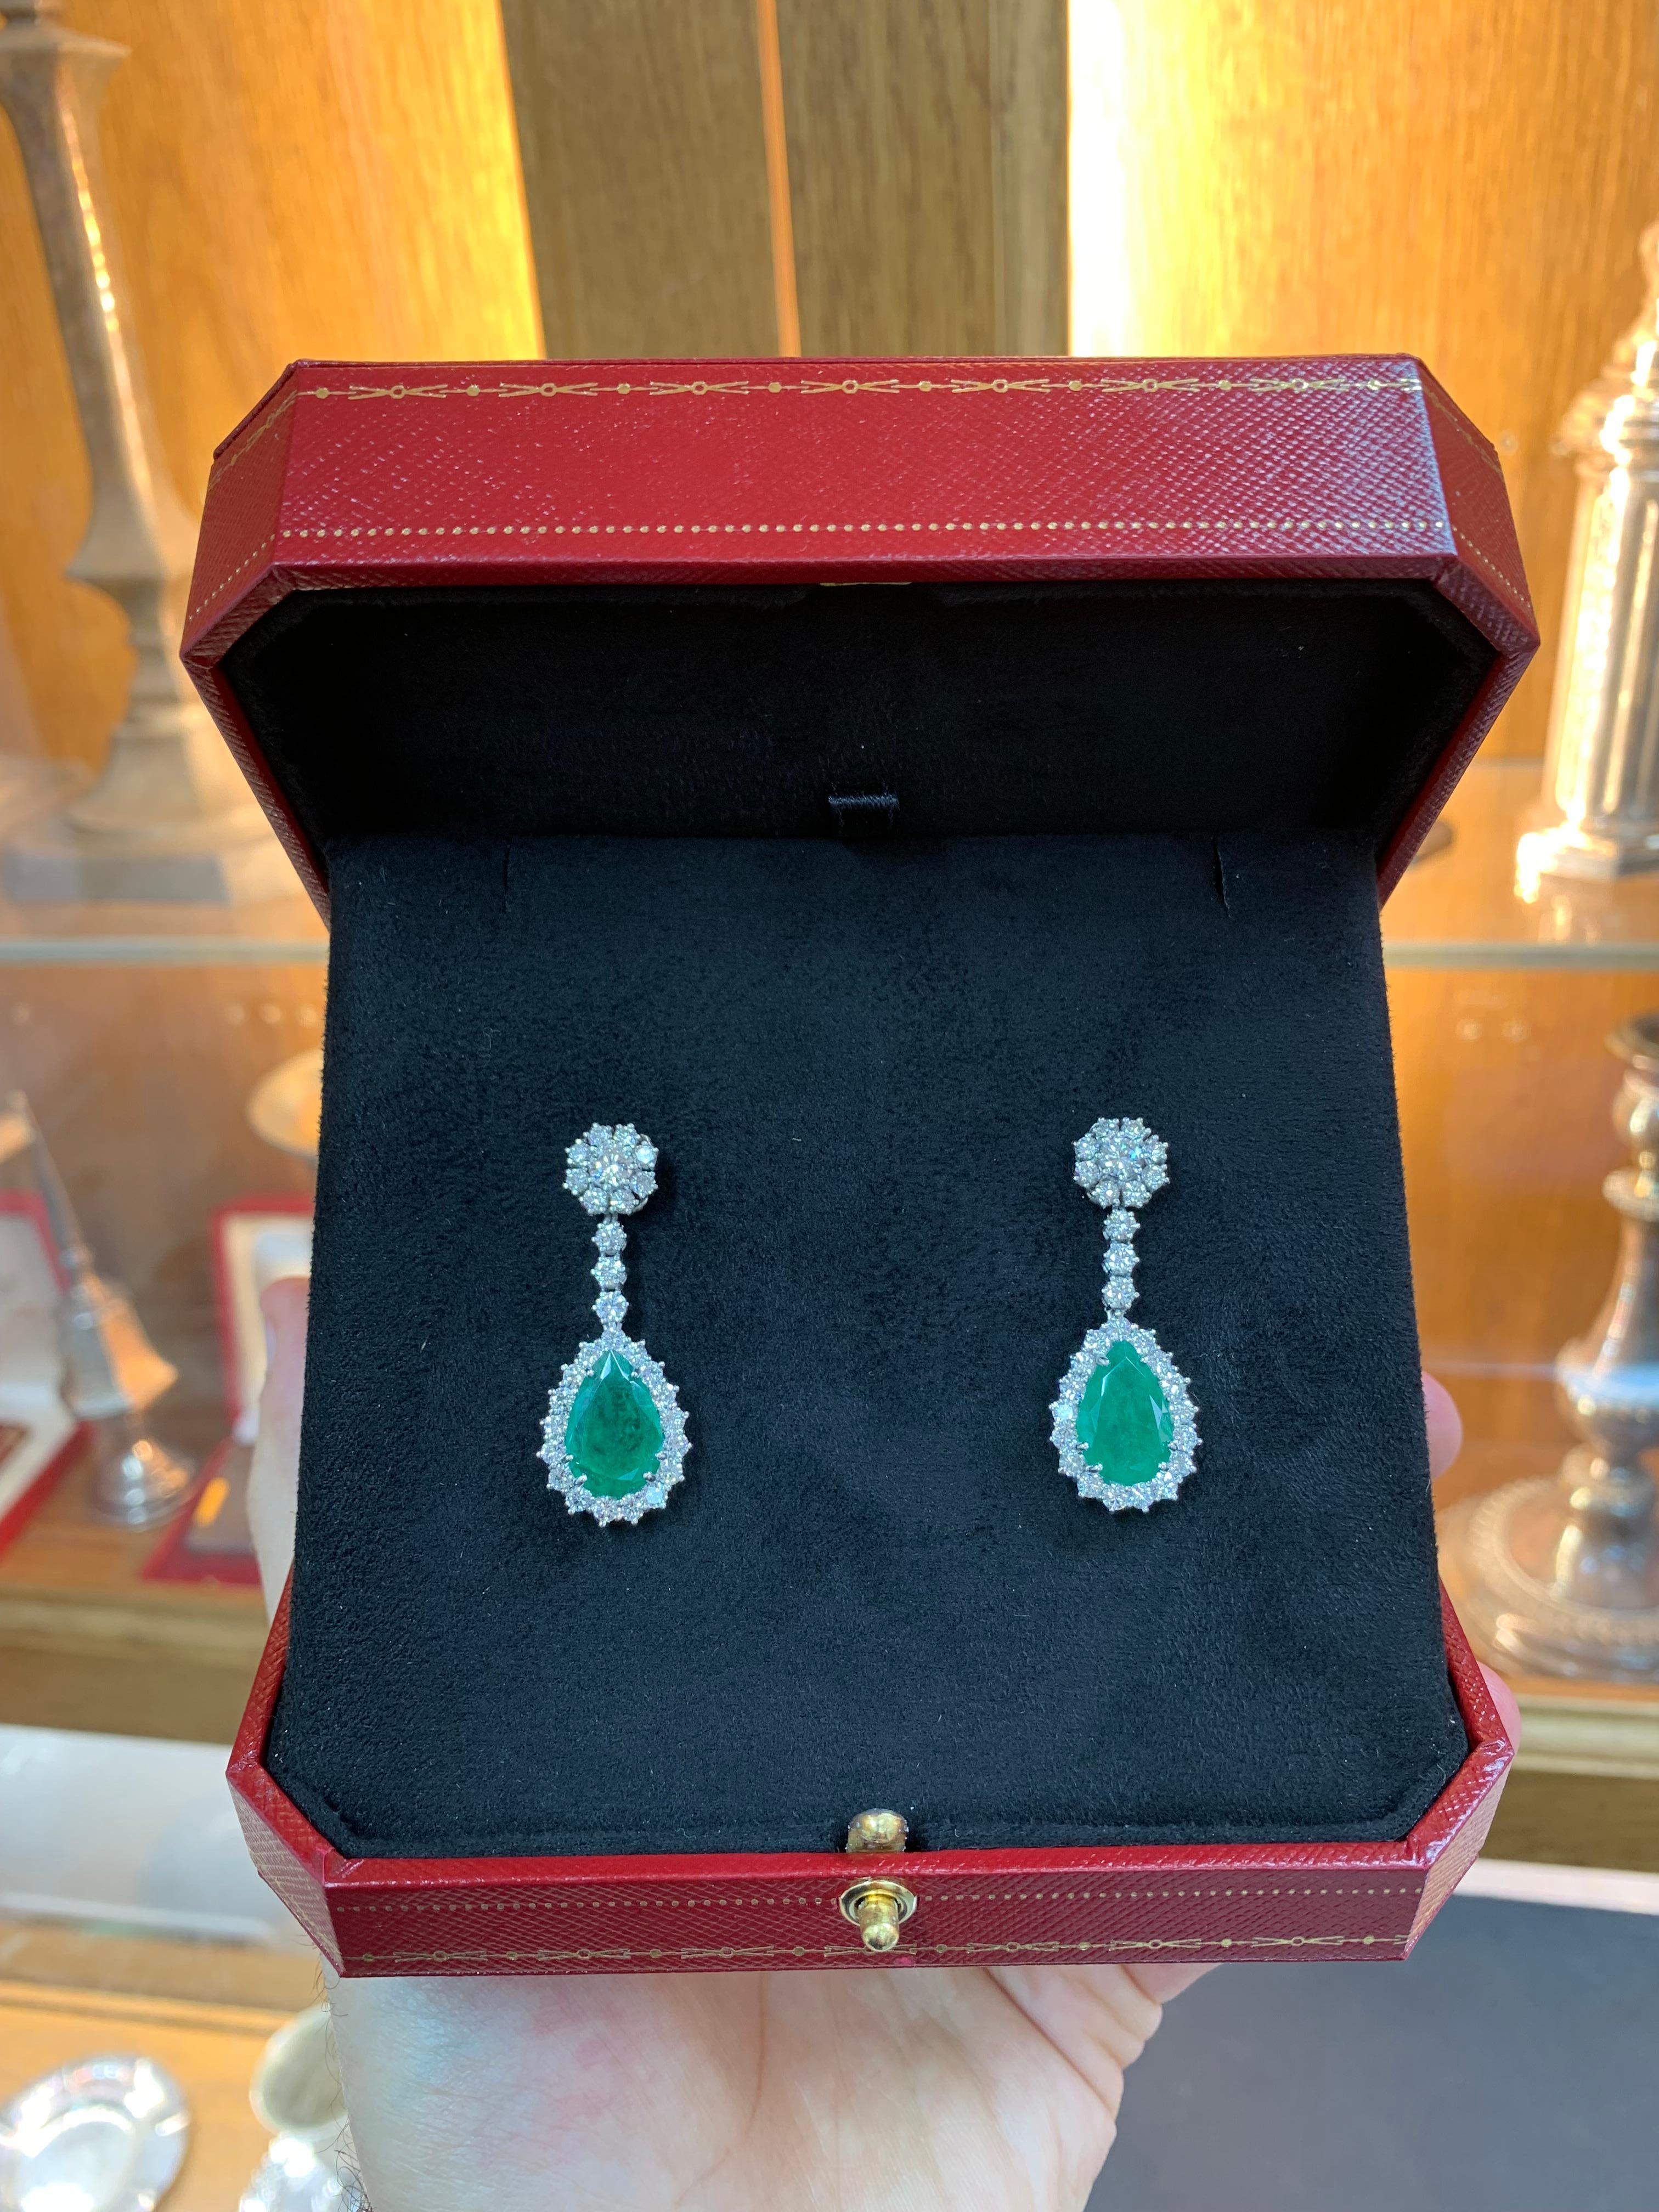 Beautifully Hand Crafted 18k White Gold Pear Shape Drop Earrings Set With Green Emeralds & Diamonds.
Amazing Shine, Incredible Craftsmanship, Unbelievable Work Of Art.
Great Statement Piece.
Nice & Large Clean Stones.
Approximately 6.0 Carats Green